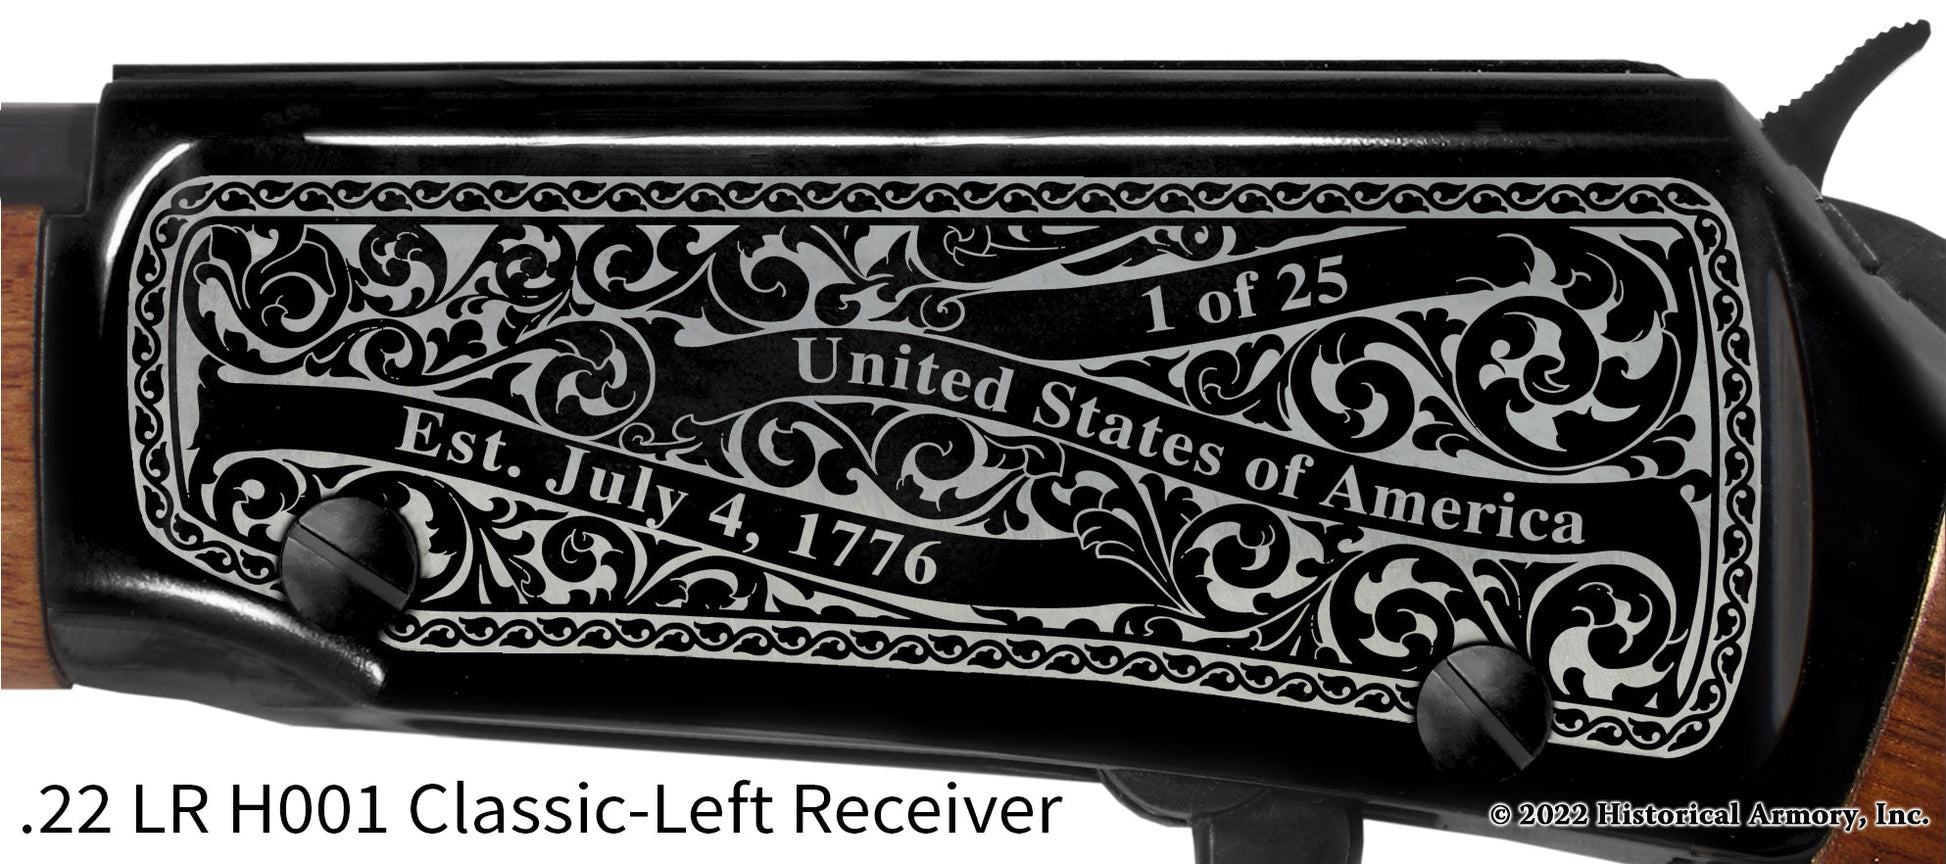 Graves County Kentucky Engraved Henry H001 Rifle